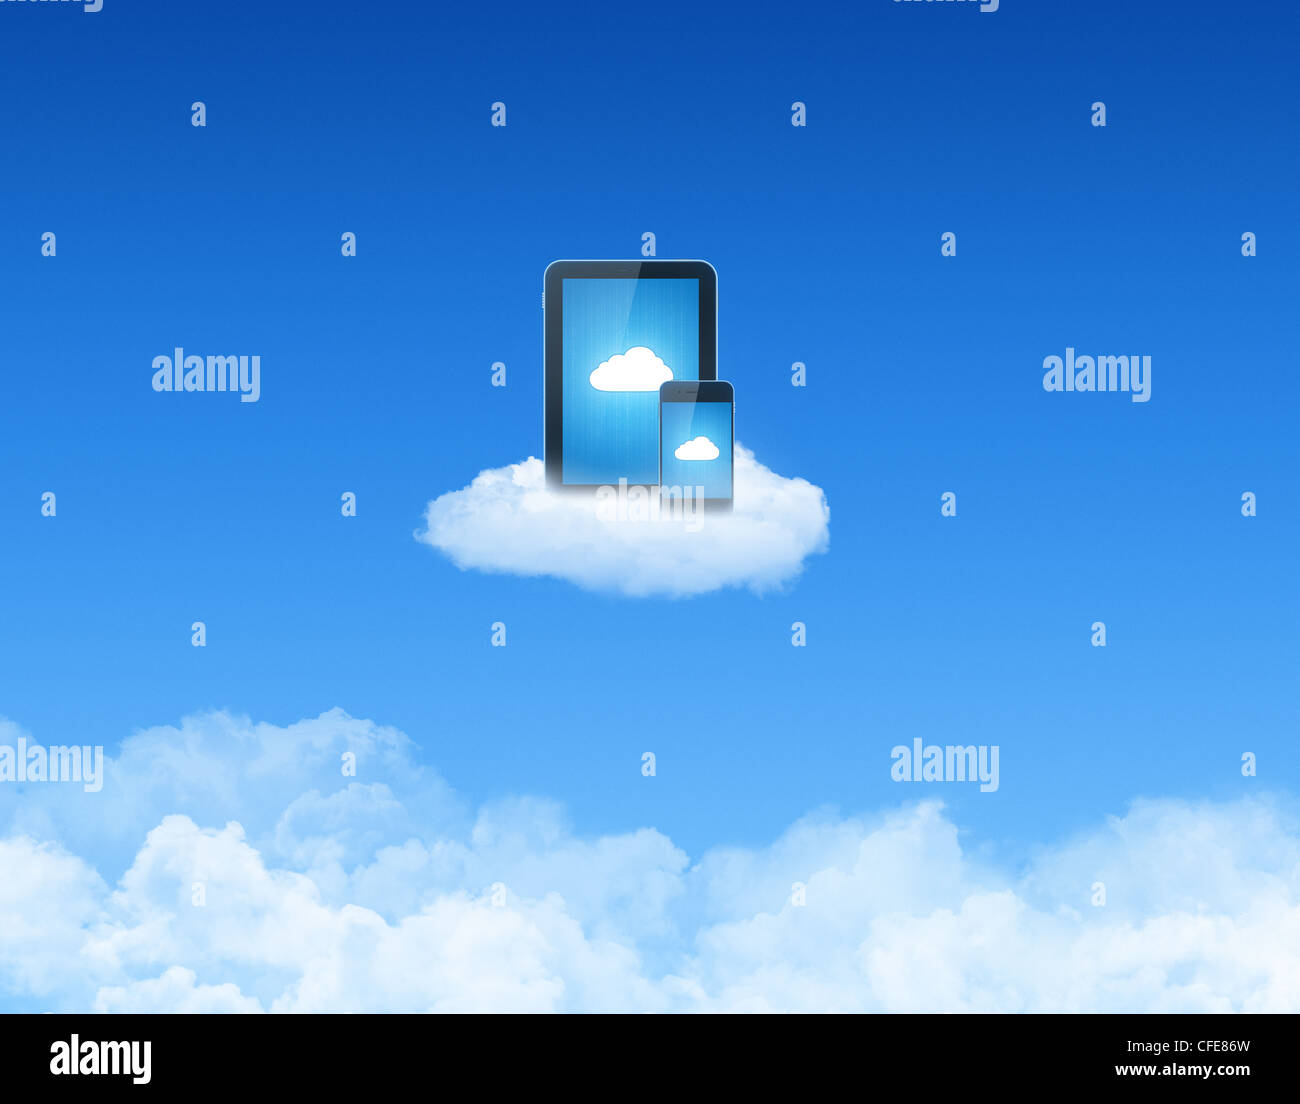 Modern tablet pc with mobile smart phone on a cloud. Conceptual image on cloud computing theme. Stock Photo